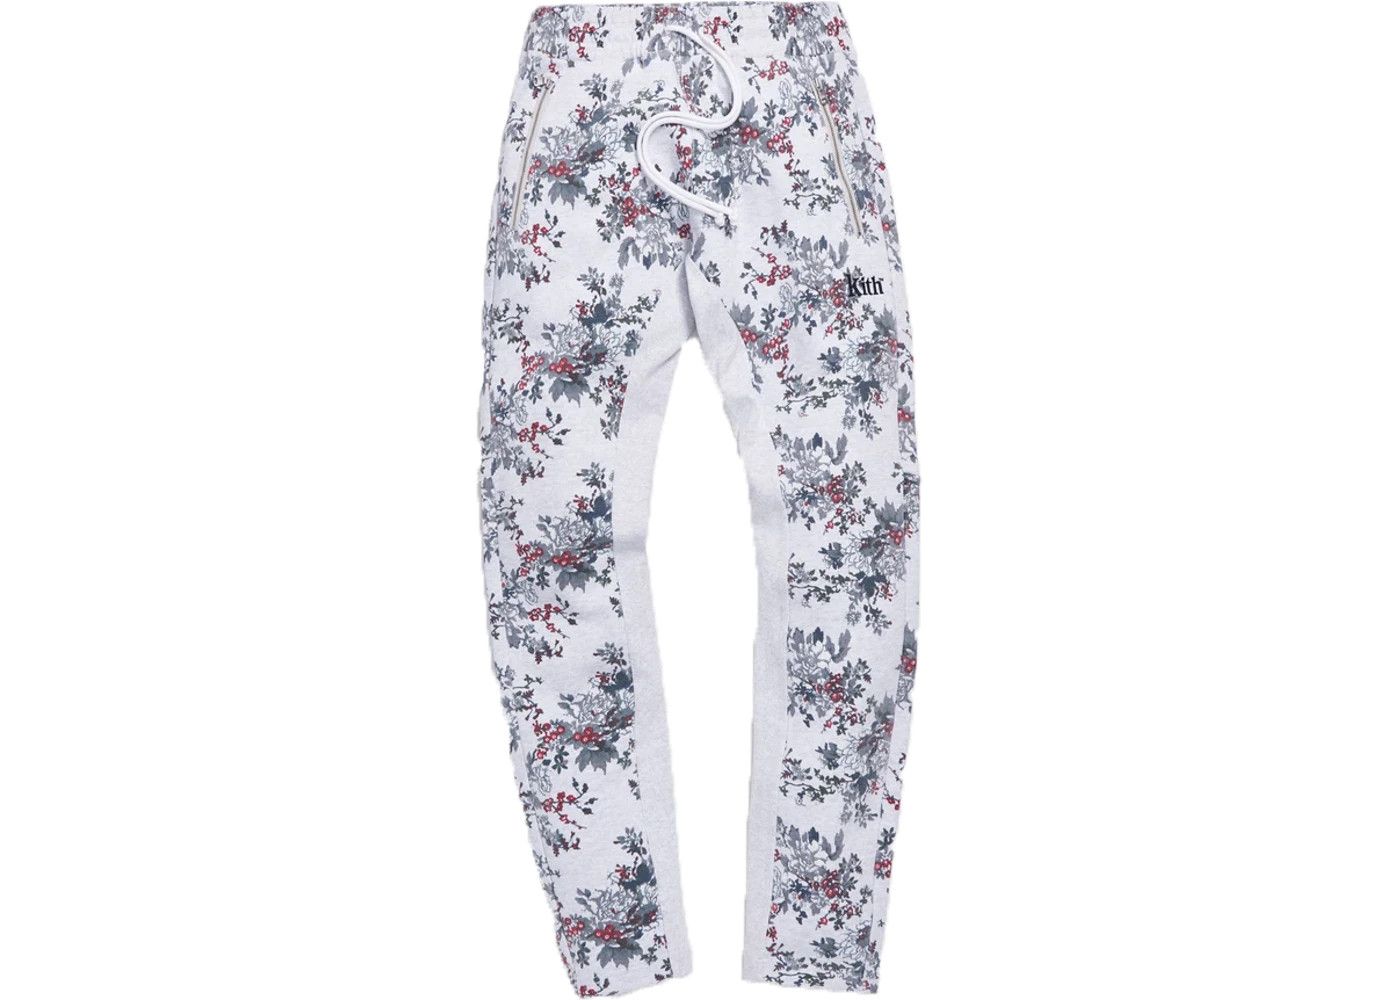 Kith Floral Bleecker Sweatpant Light Heather Grey | Grailed